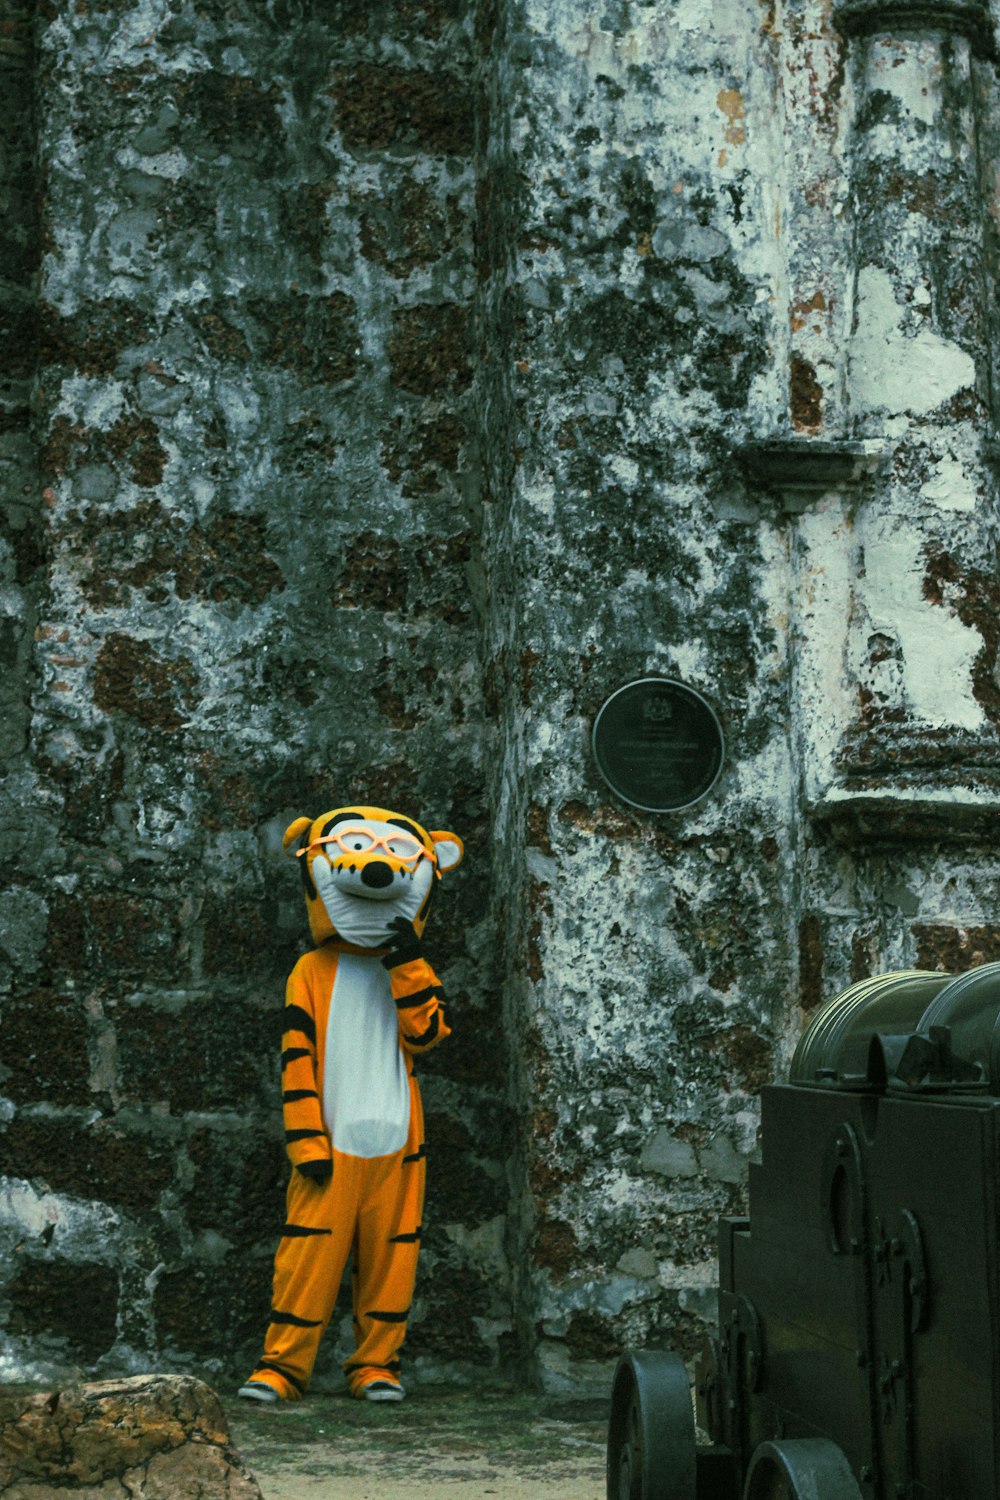 a person in a tiger costume standing next to a truck